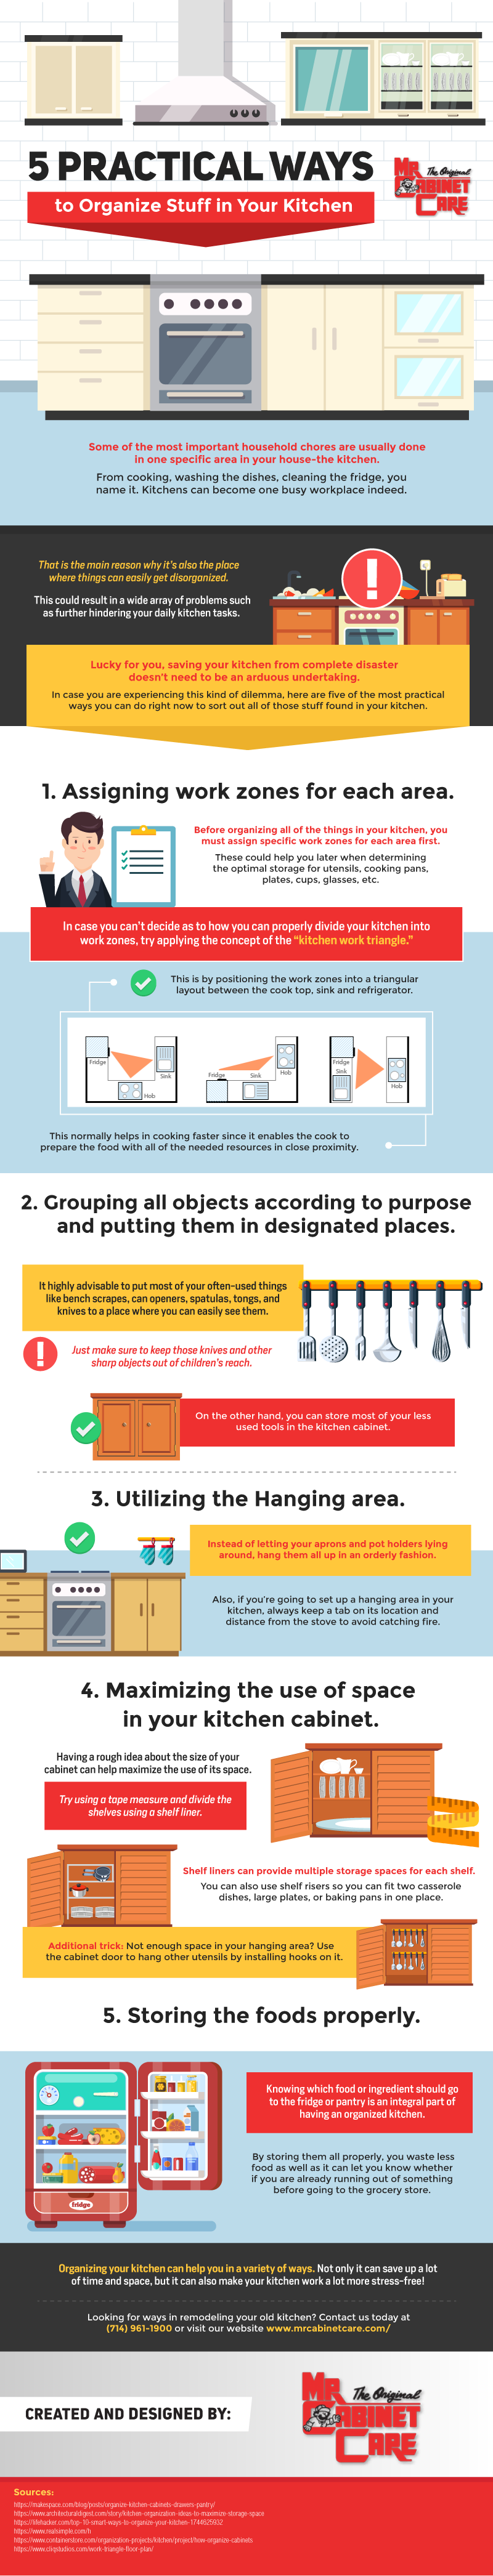 How To Organize the Kitchen Properly